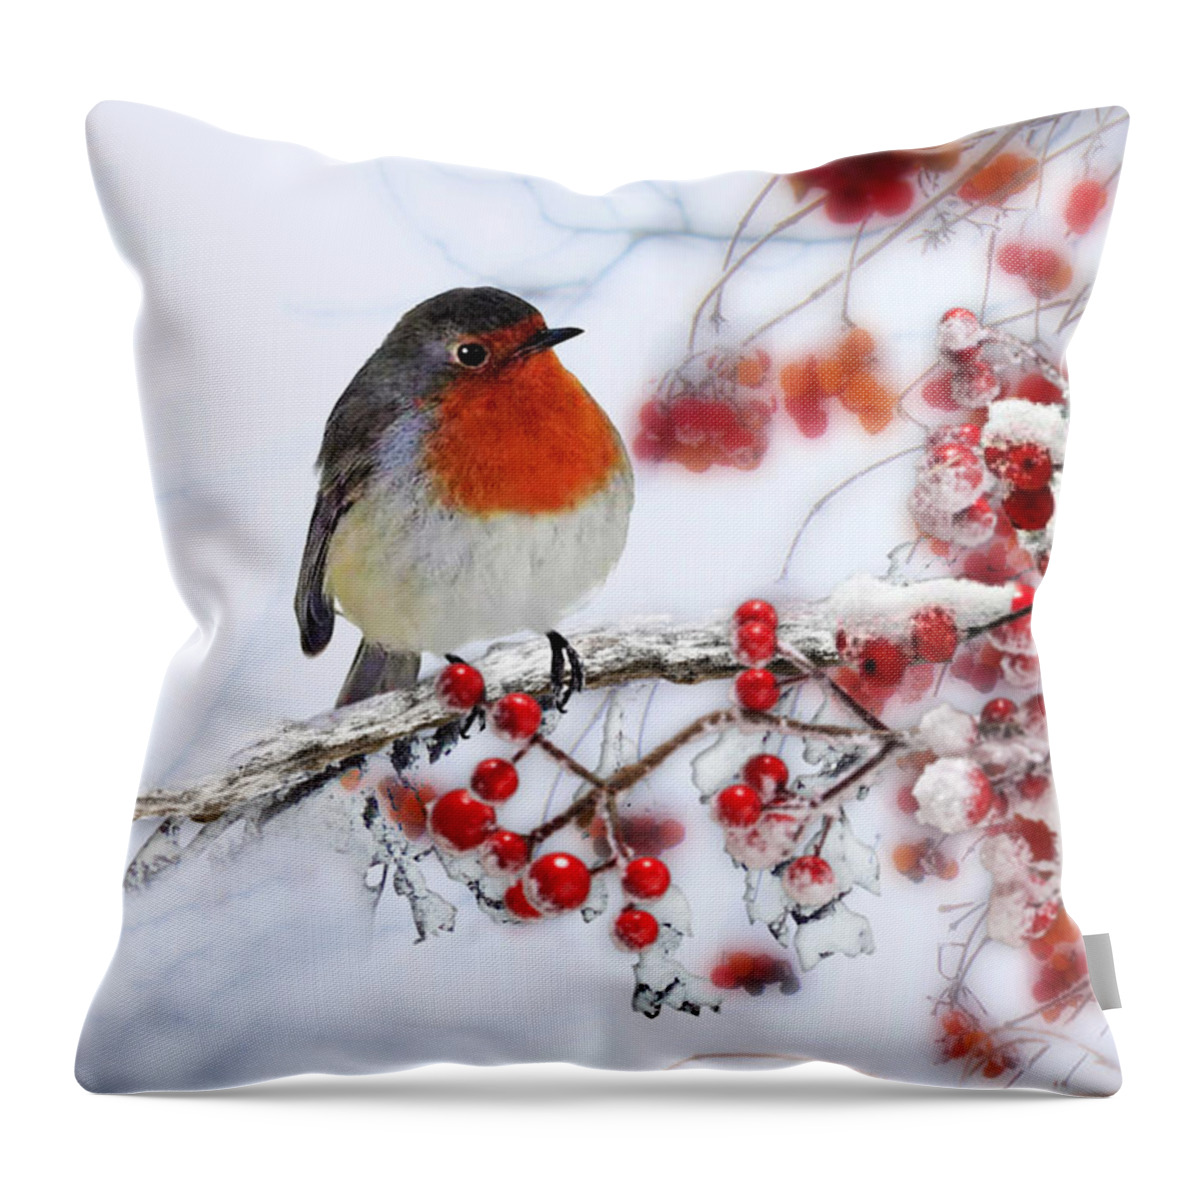 Robin On Red Berries Throw Pillow featuring the pyrography Robin and Berries by Morag Bates